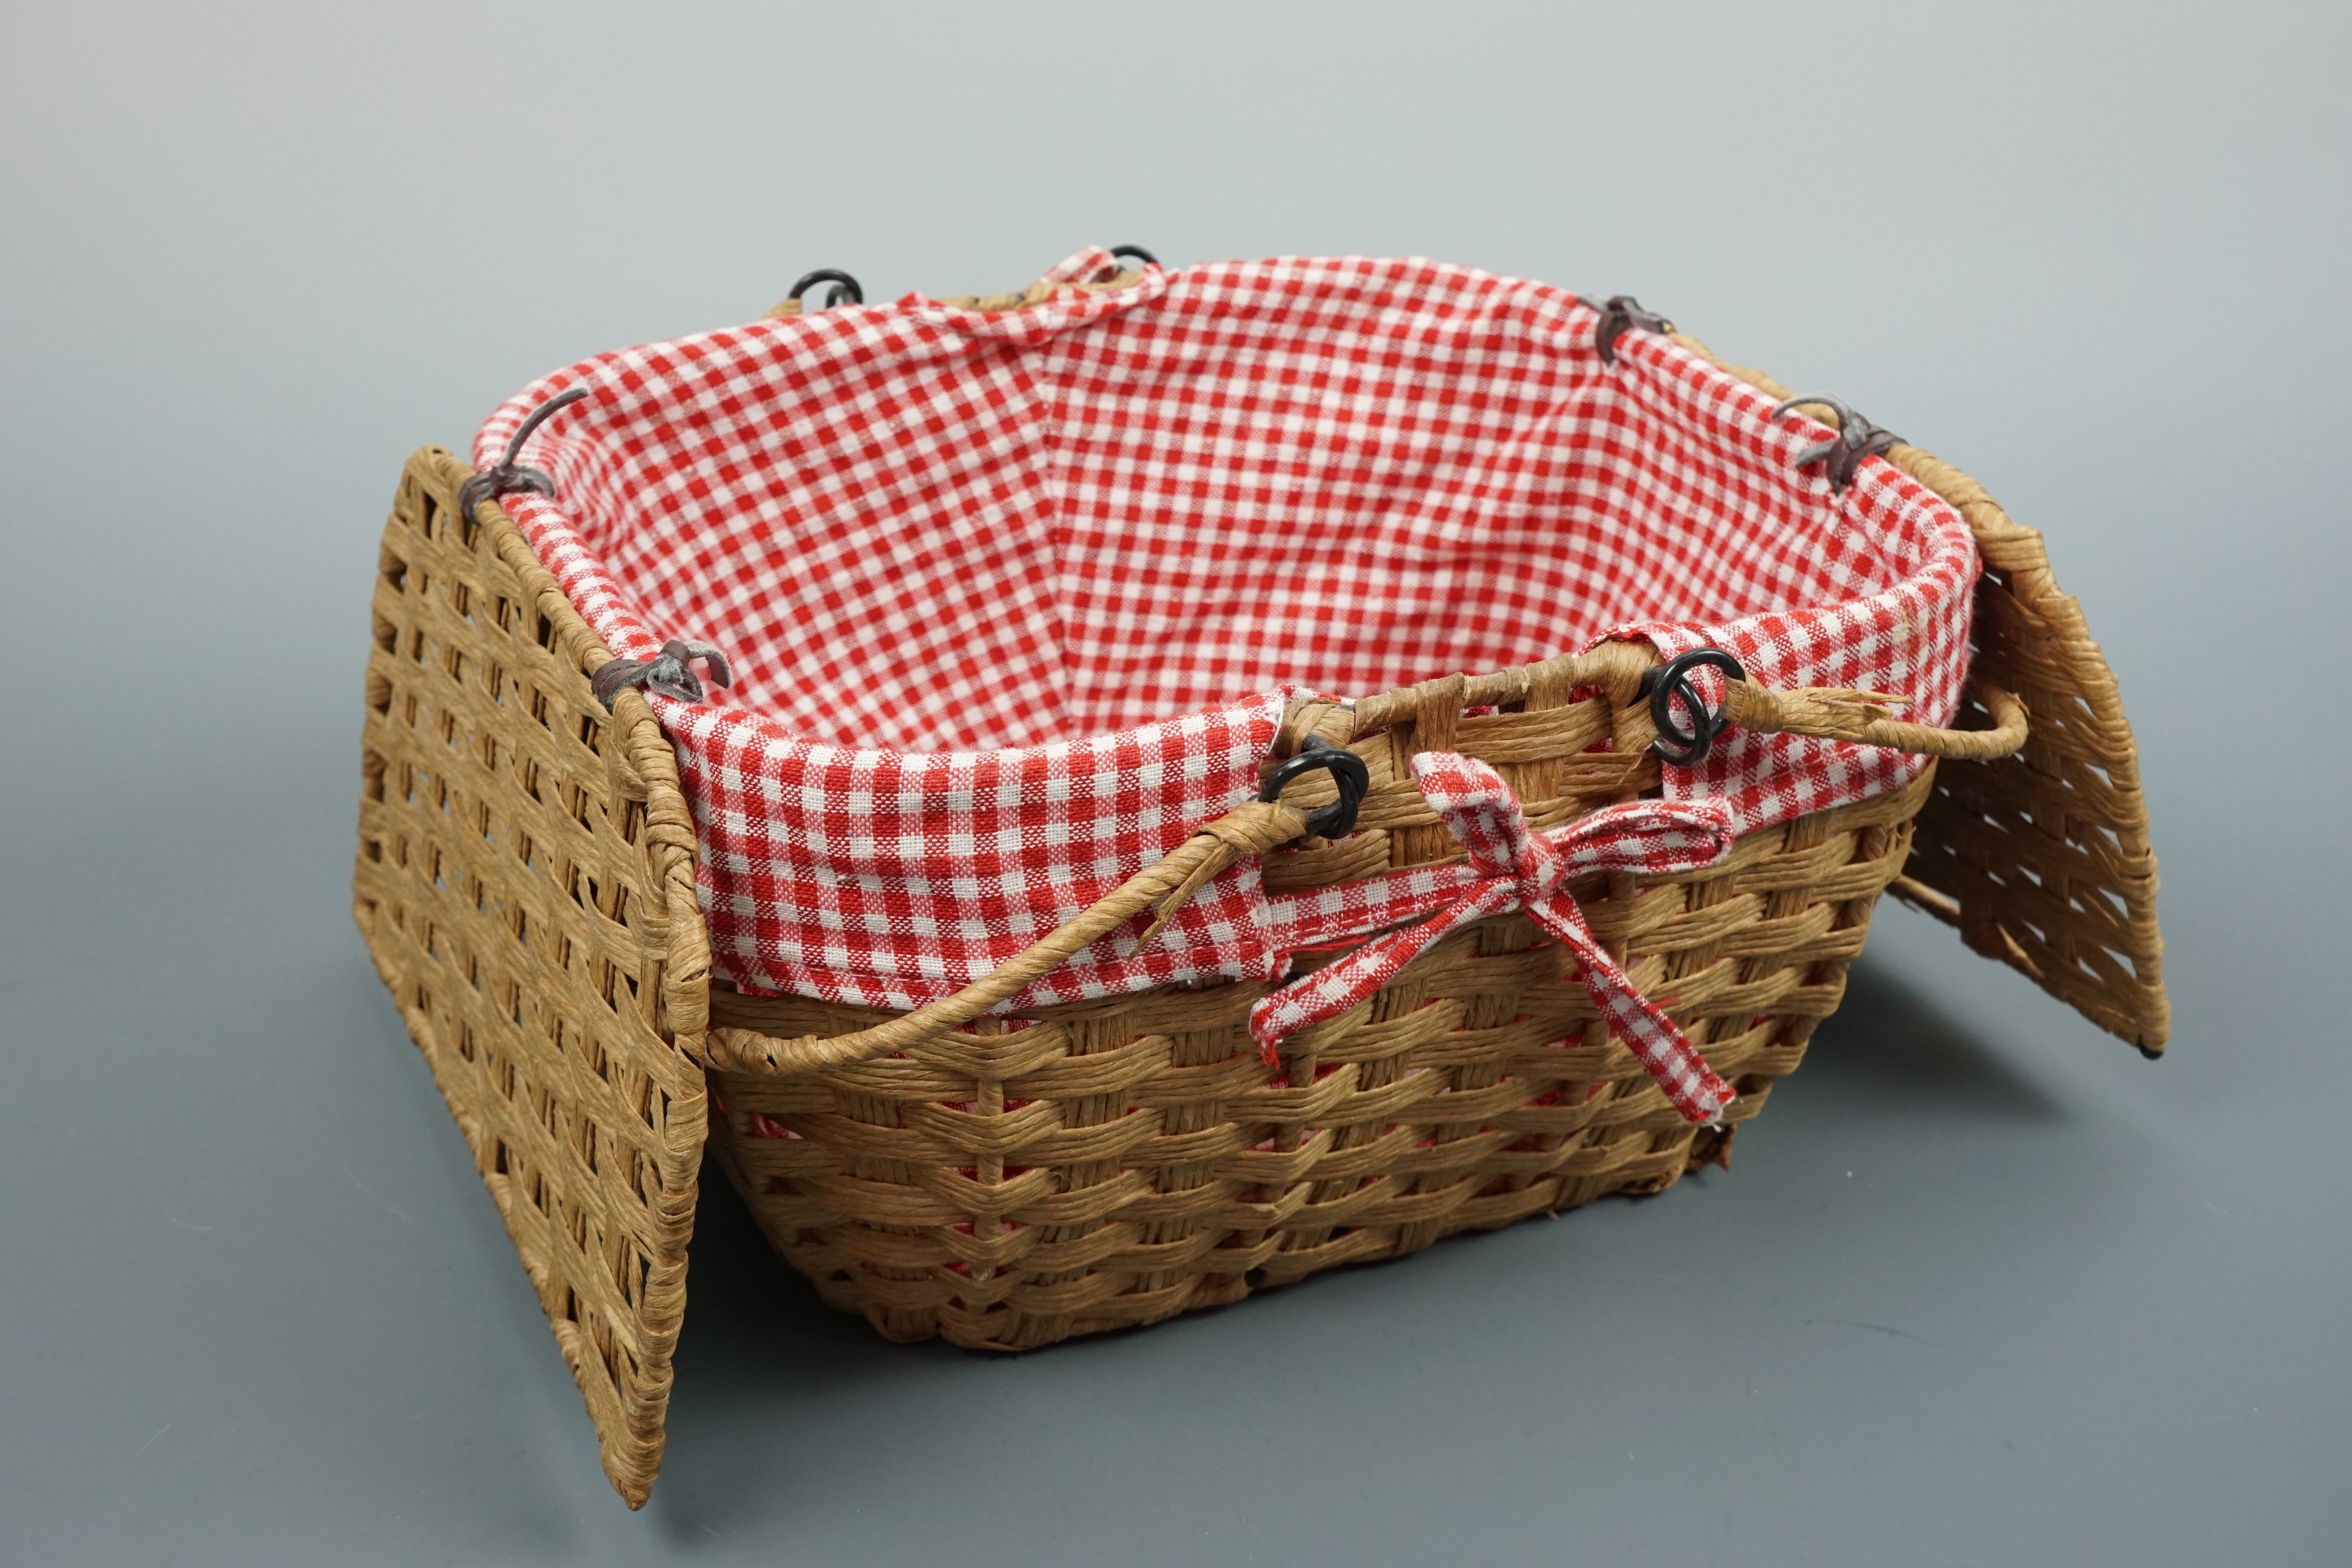 A string sewing box, 29 × 16 cm high - Image 2 of 2